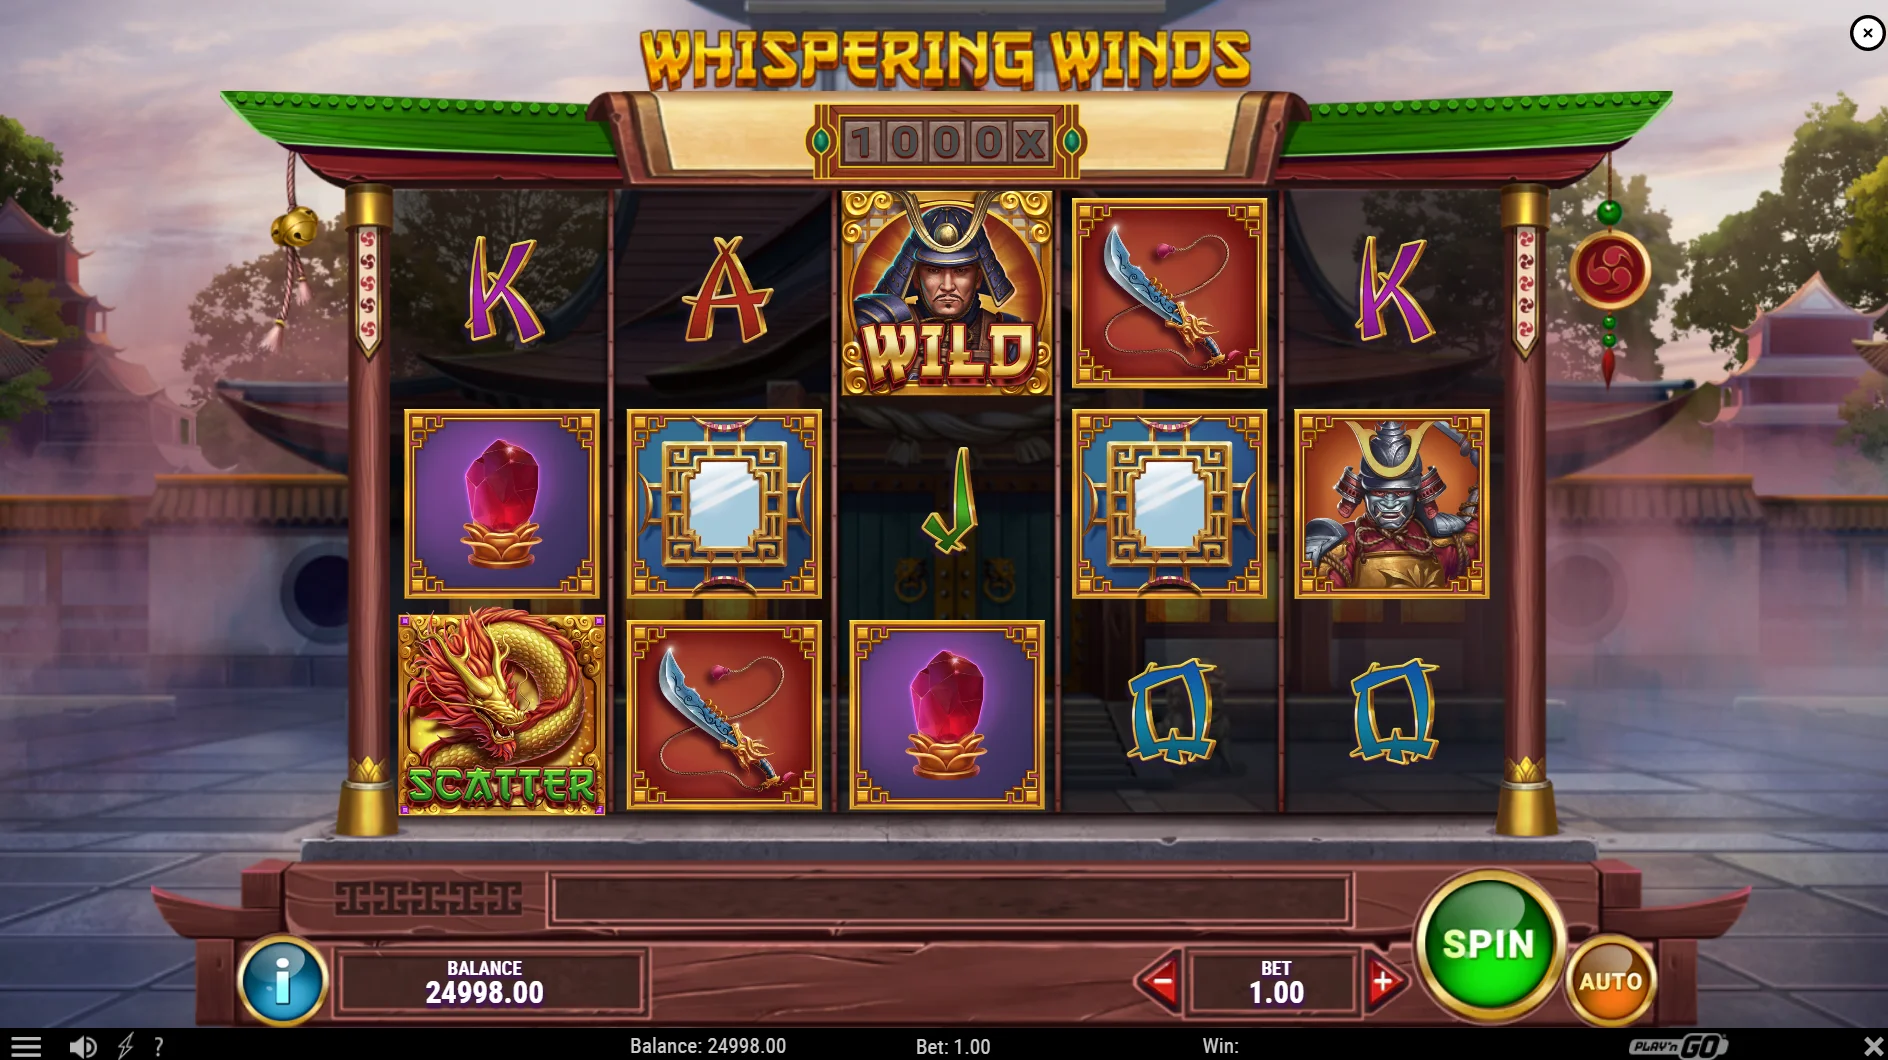 Whispering Winds Base Game play